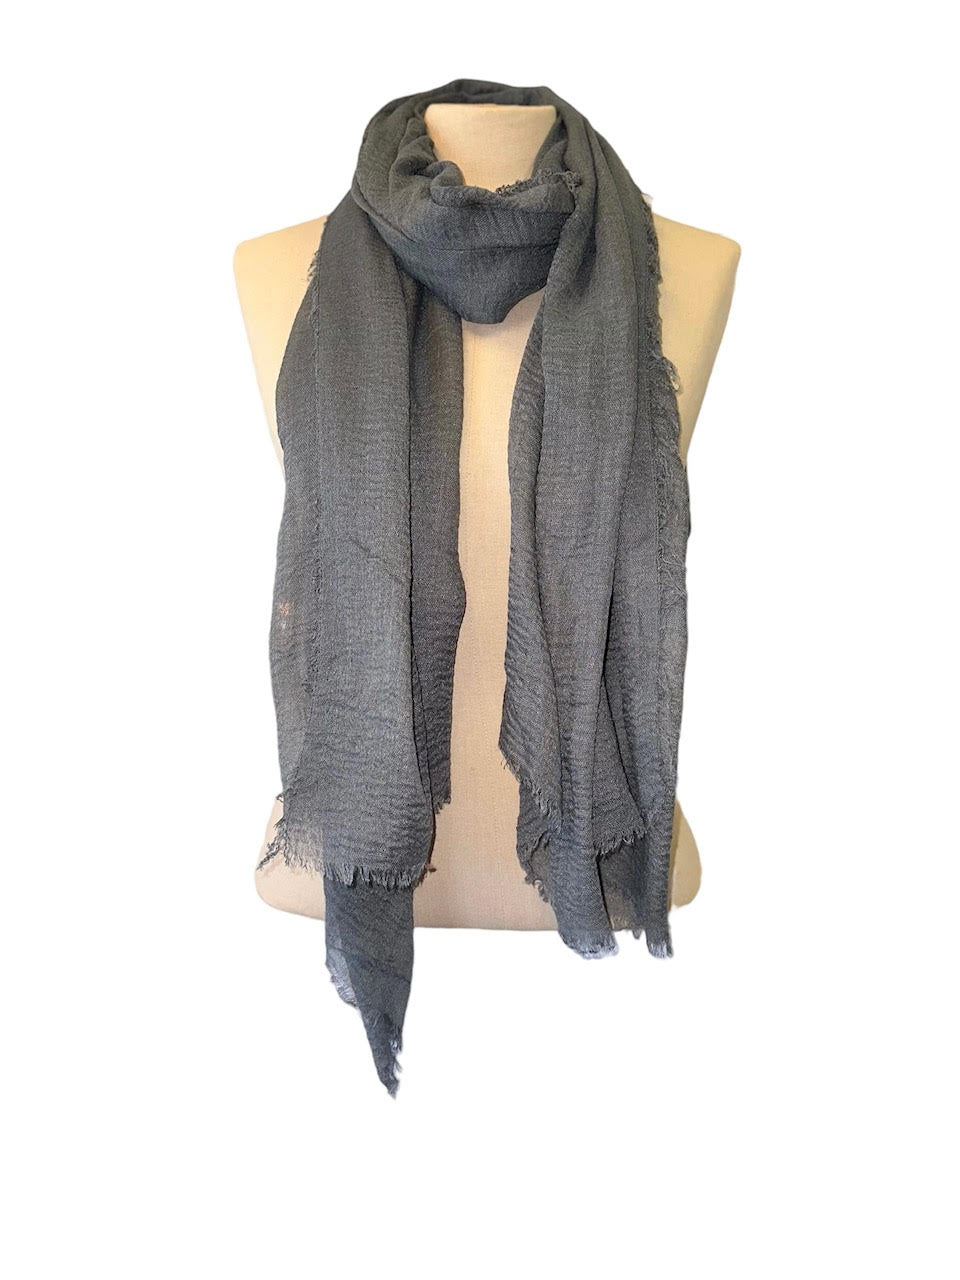 Wrap/Scarf in charcoal by Market Co